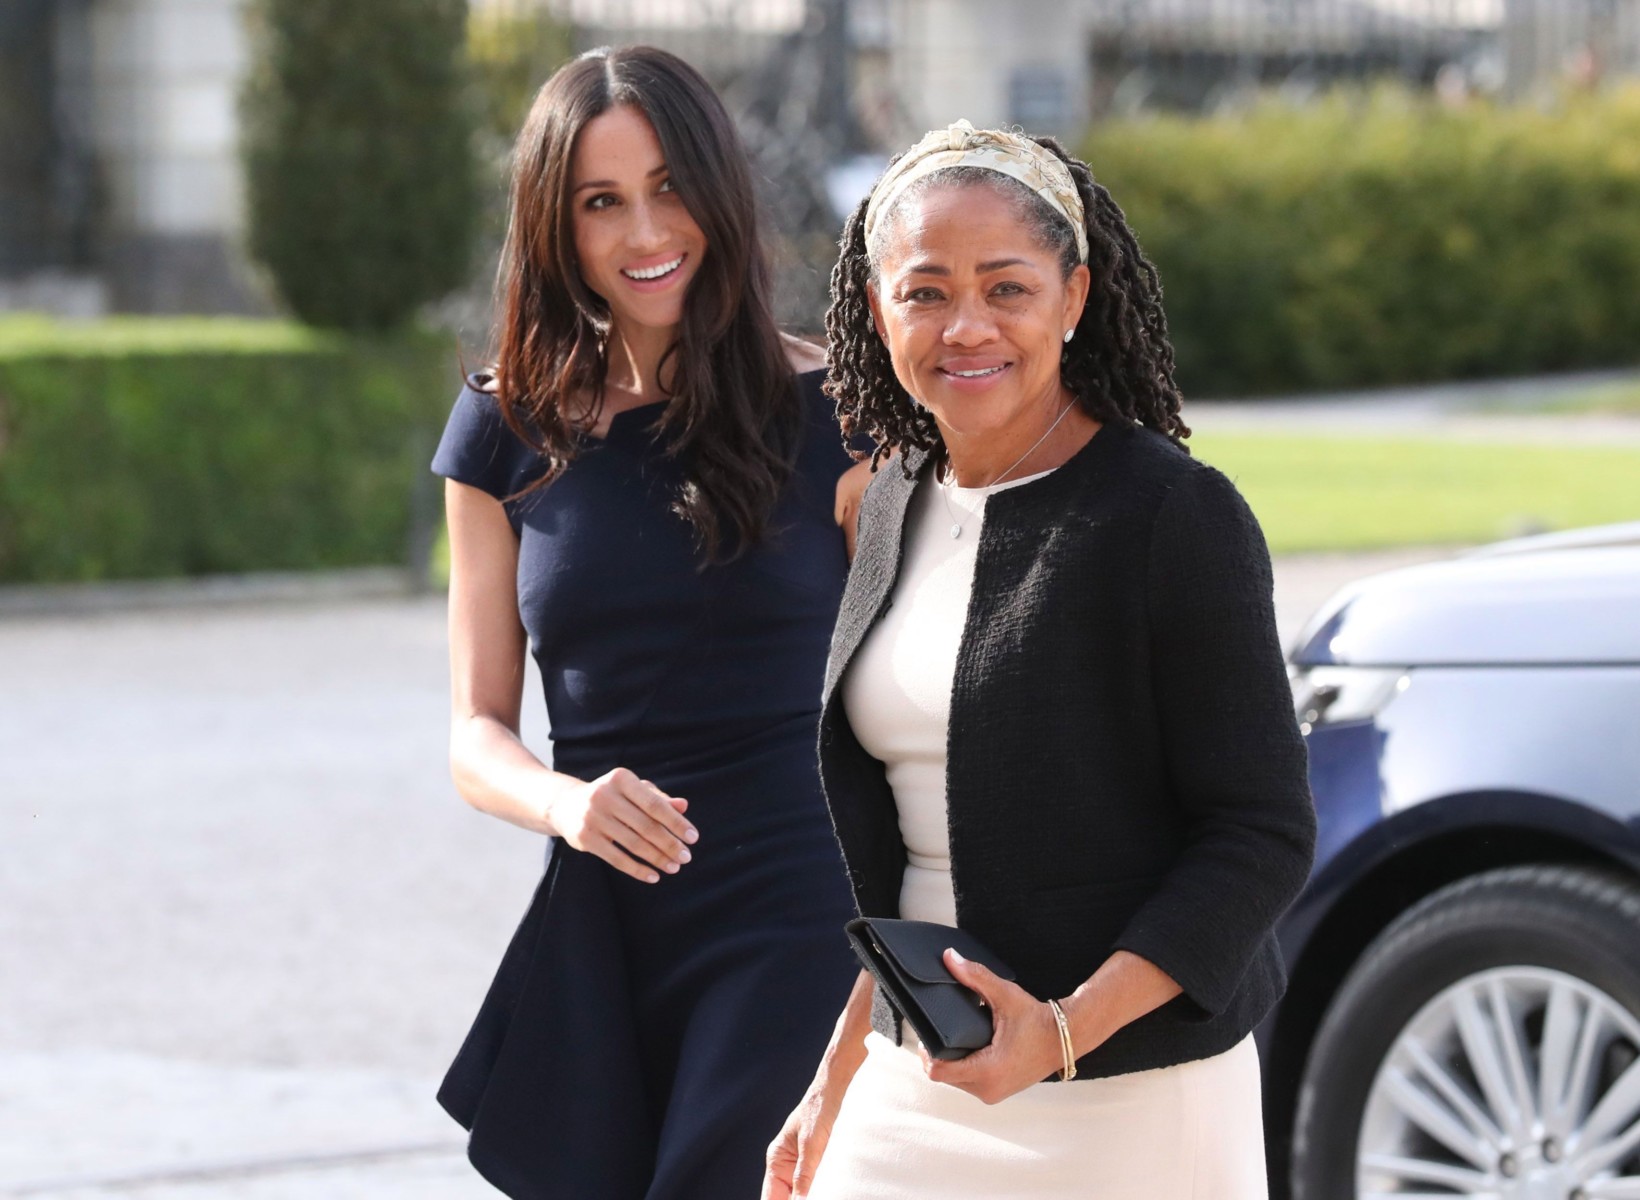 The home is just 30 miles from where Meghan's mum Doria Ragland lives